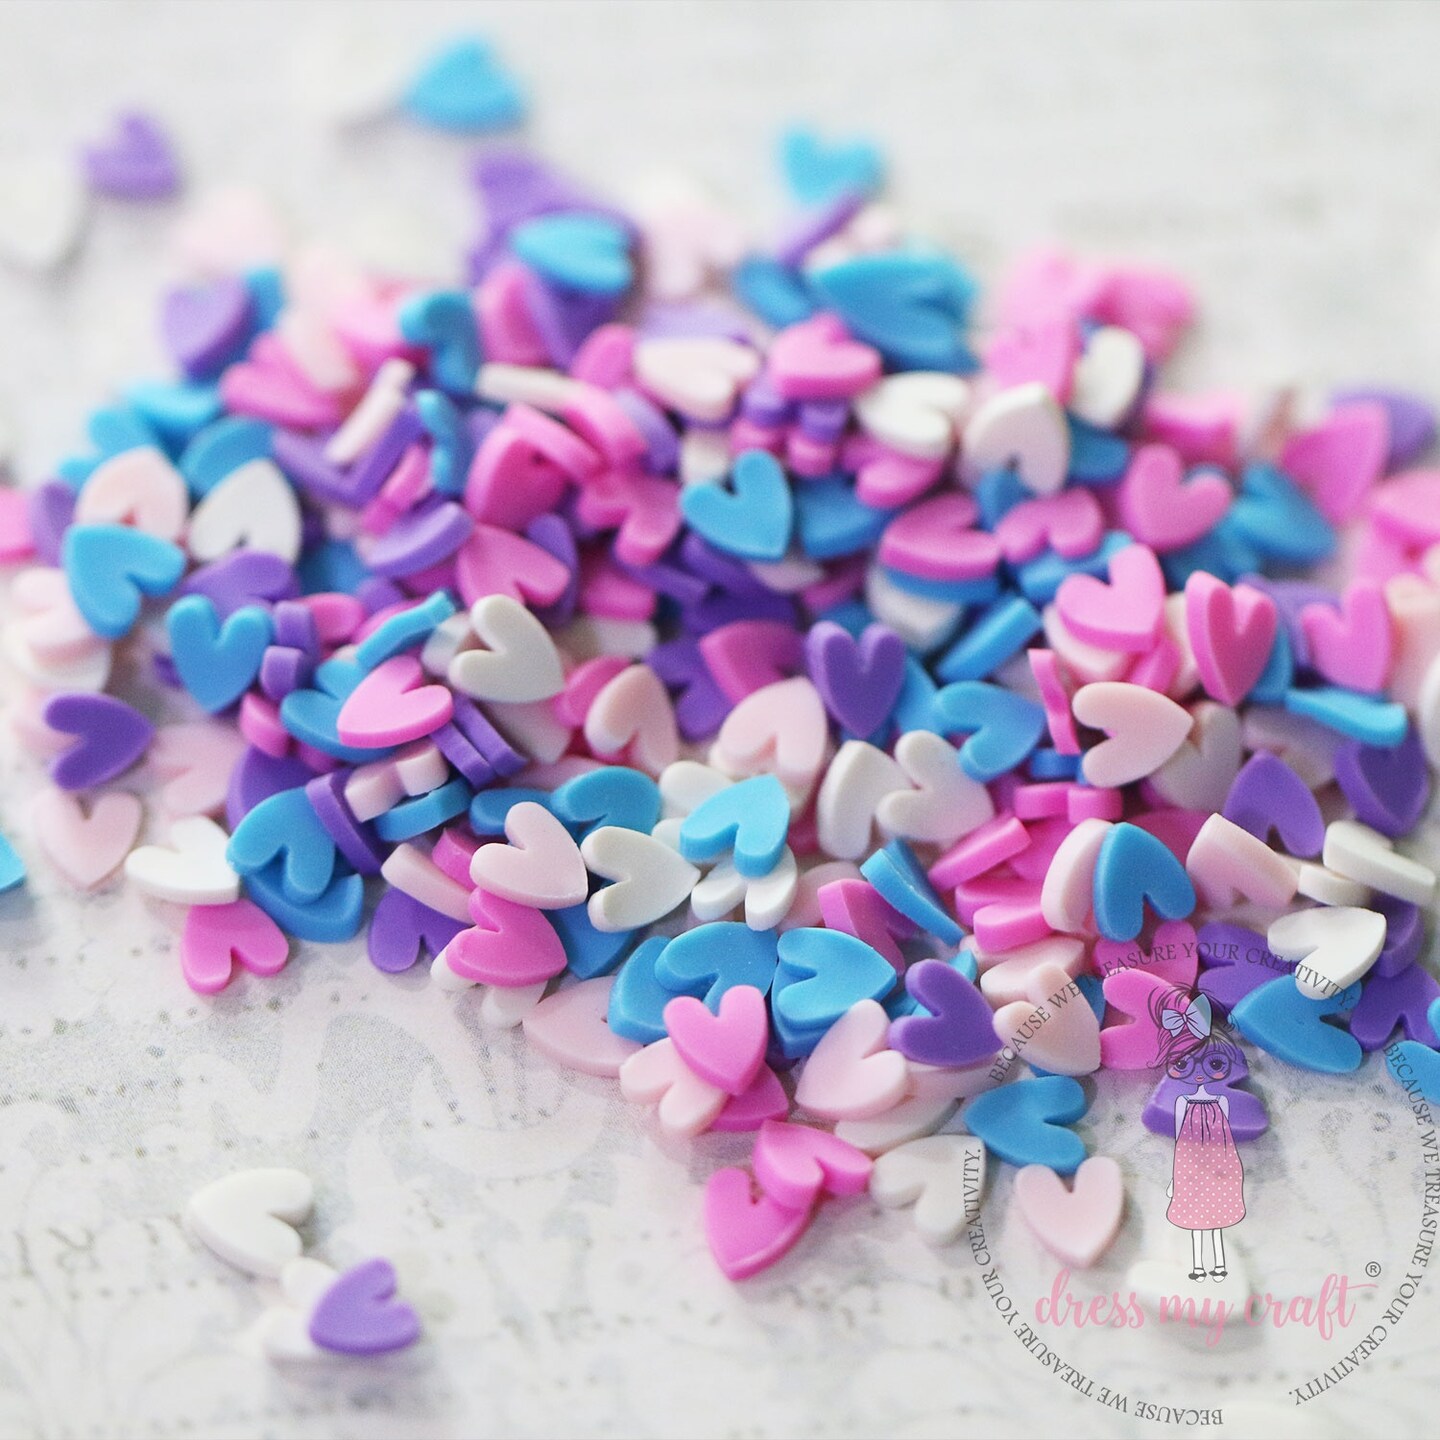 Dress My Craft Shaker Elements 8gms-Pastel Hearts Slices